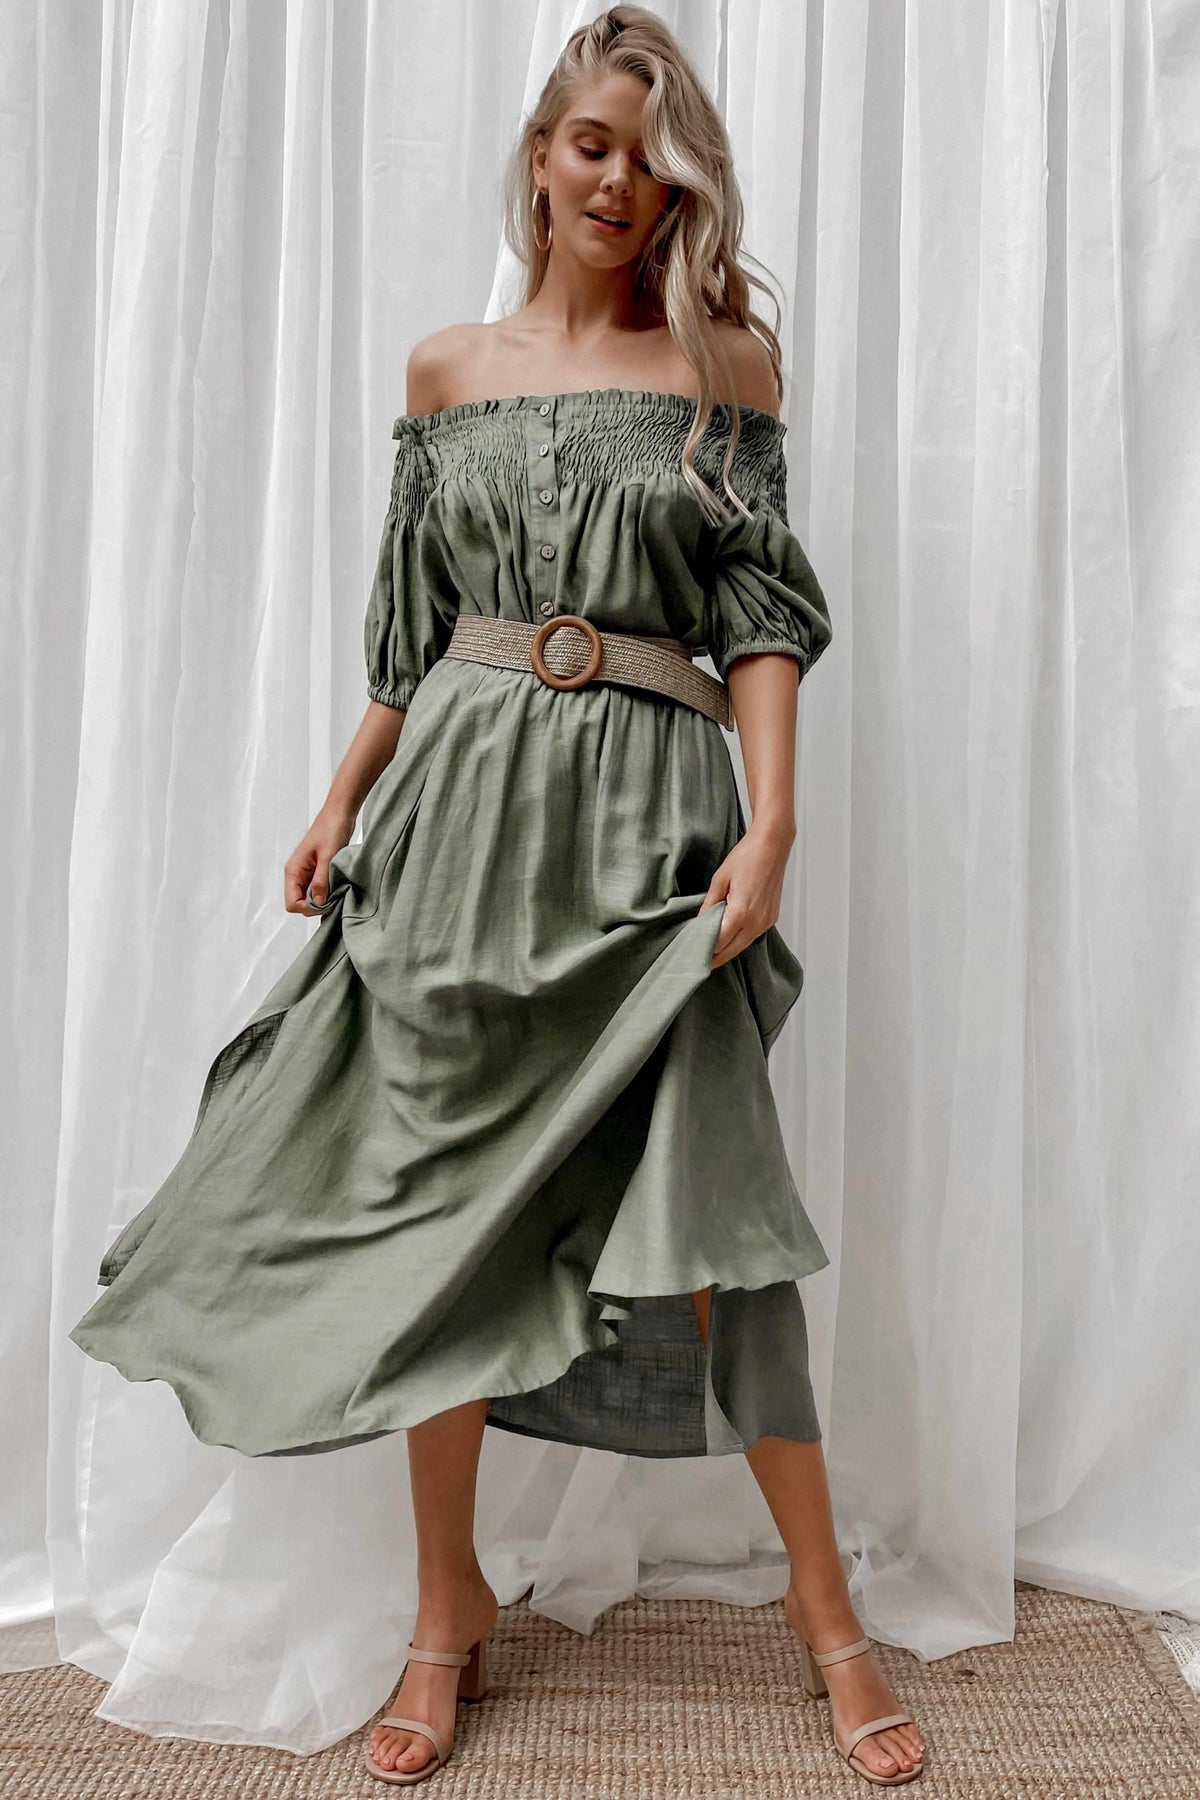 Sarsha Skirt, BOTTOMS, GREEN, MAXI DRESS, Sale, SKIRTS, Shop The Latest Sarsha Skirt Only 55.00 from MISHKAH FASHION:, Our New Sarsha Skirt is only $55.00-We Have The Latest Pants | Shorts | Skirts @ Mishkah Online Fashion Boutique-MISHKAH